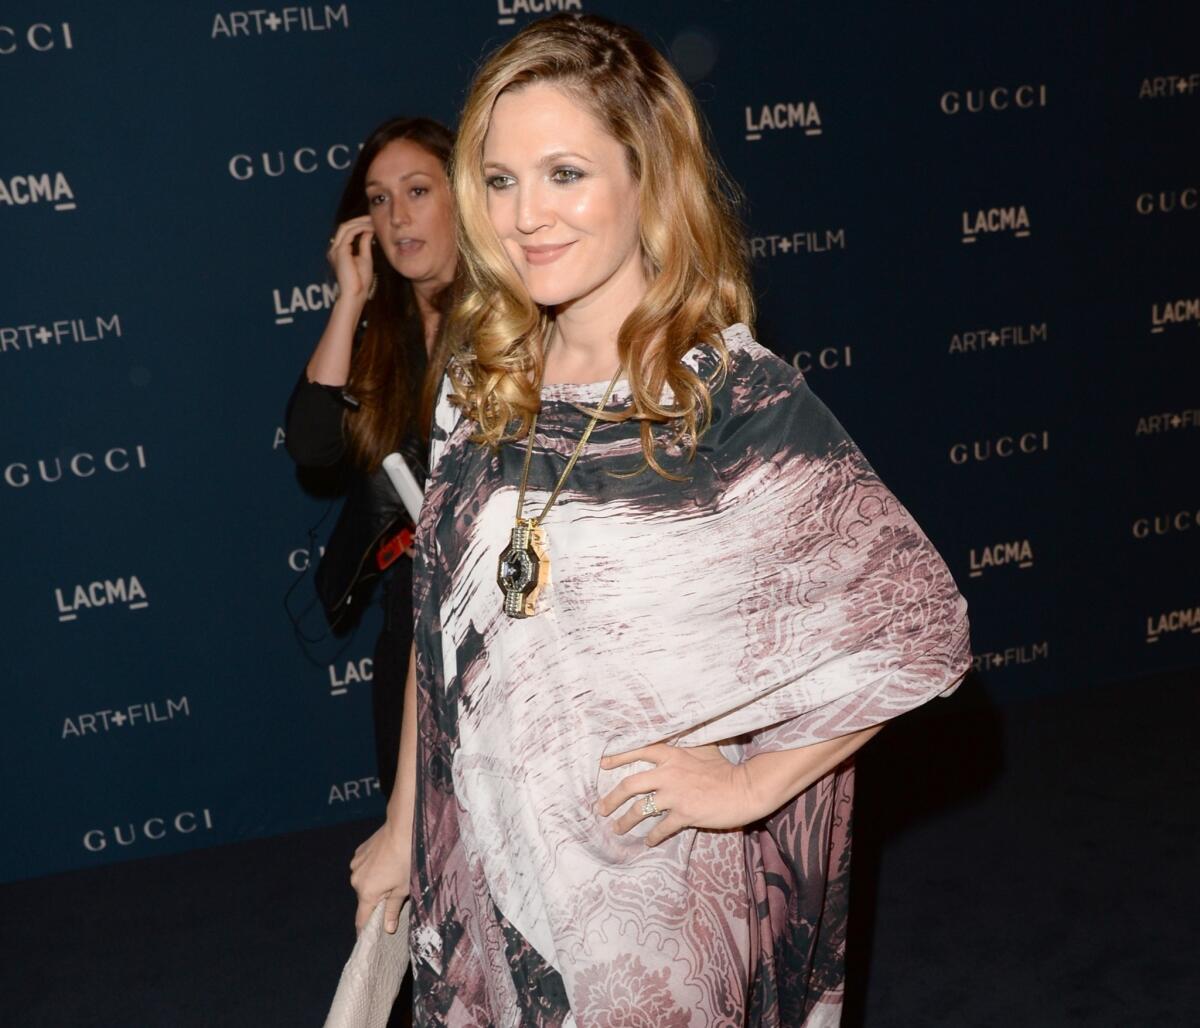 Drew Barrymore is pregnant with her second child and is decidedly more open about maternity this time around.